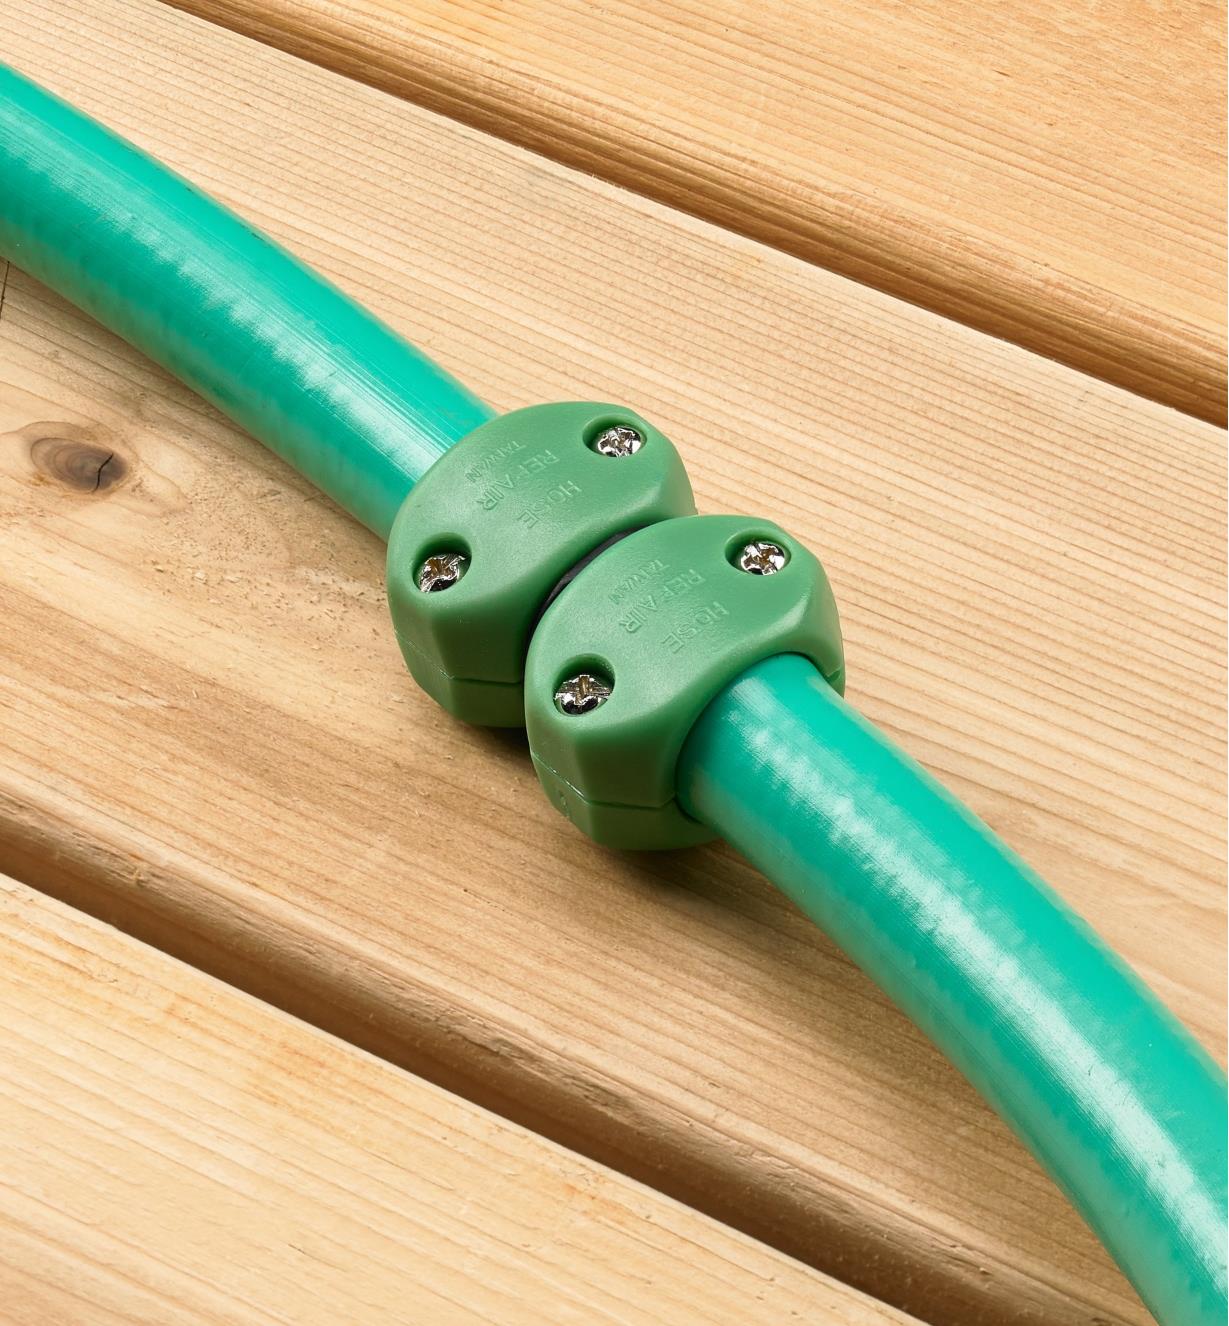 The hose mender used to link two sections of garden hose